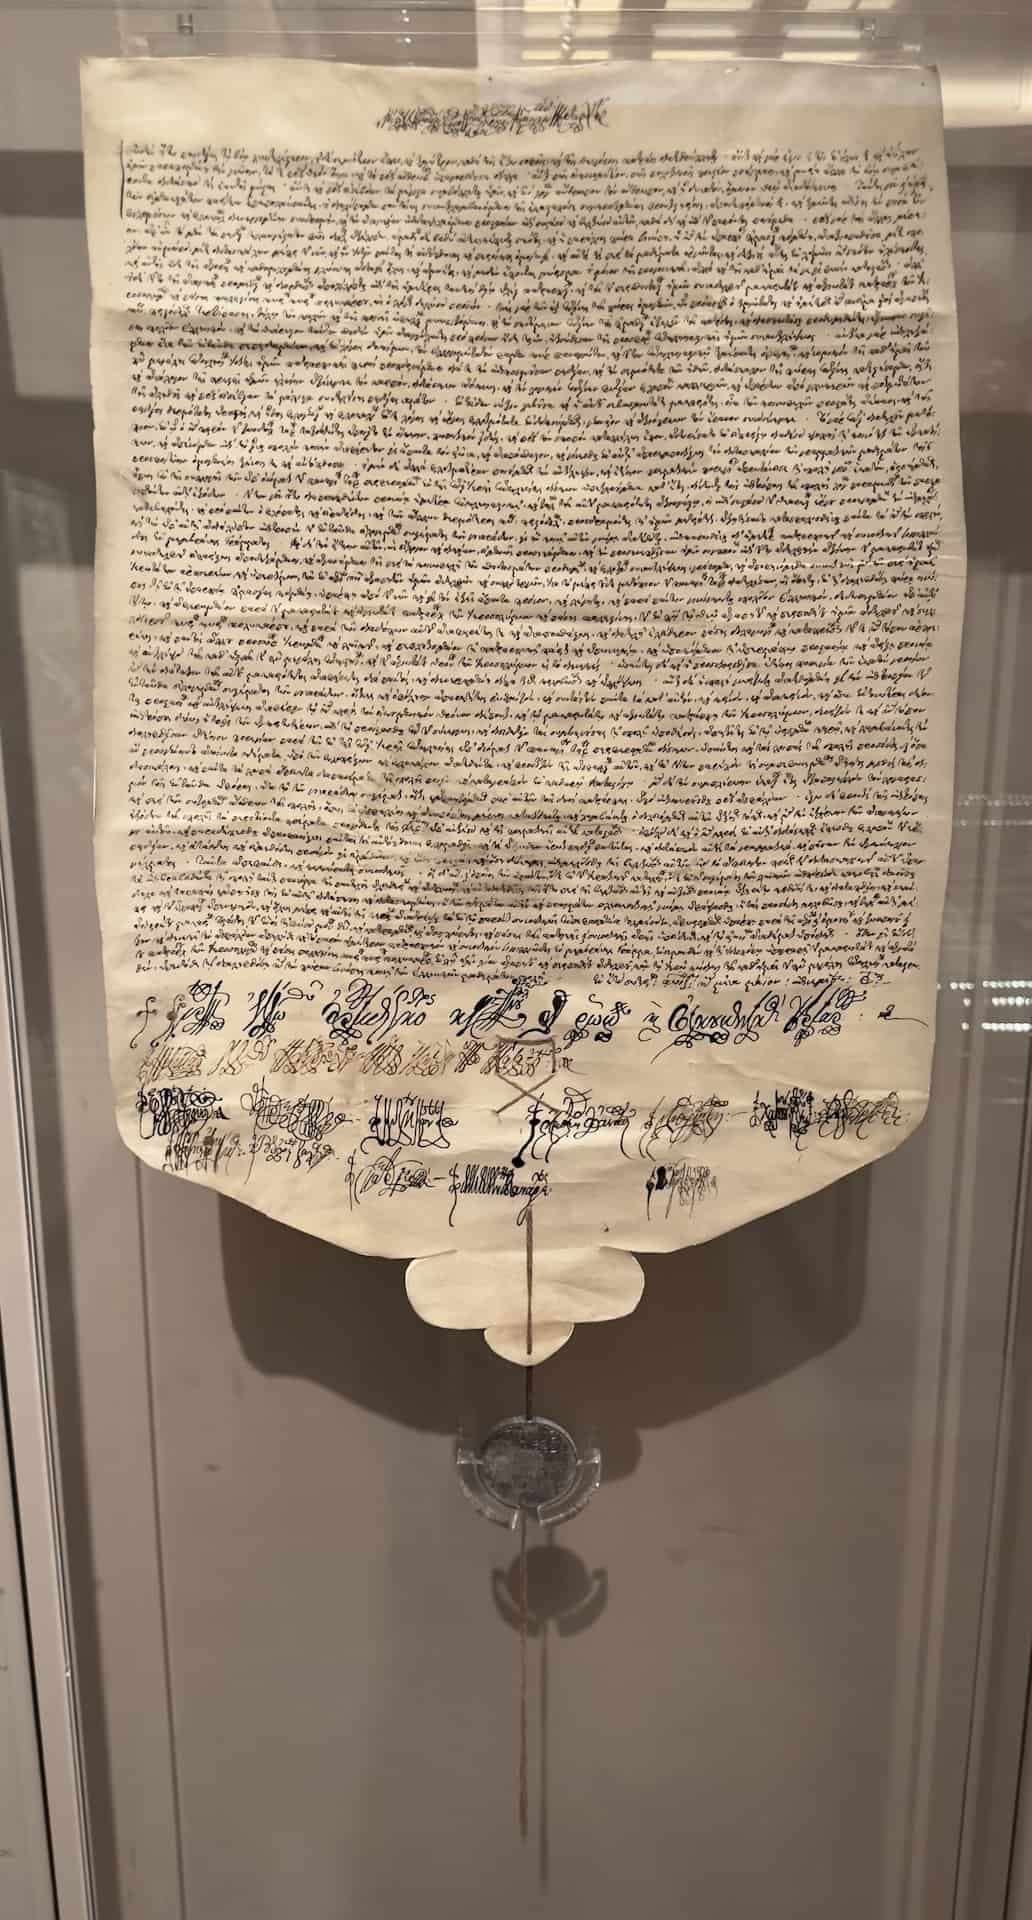 Sigillion issued by Cyril VI (1769-1821), Patriarch of Constantinople, concerning the foundation of a Greek school in Sinope (now Sinop, Turkey) in Pontus, 1817 at the Byzantine Museum in Athens, Greece